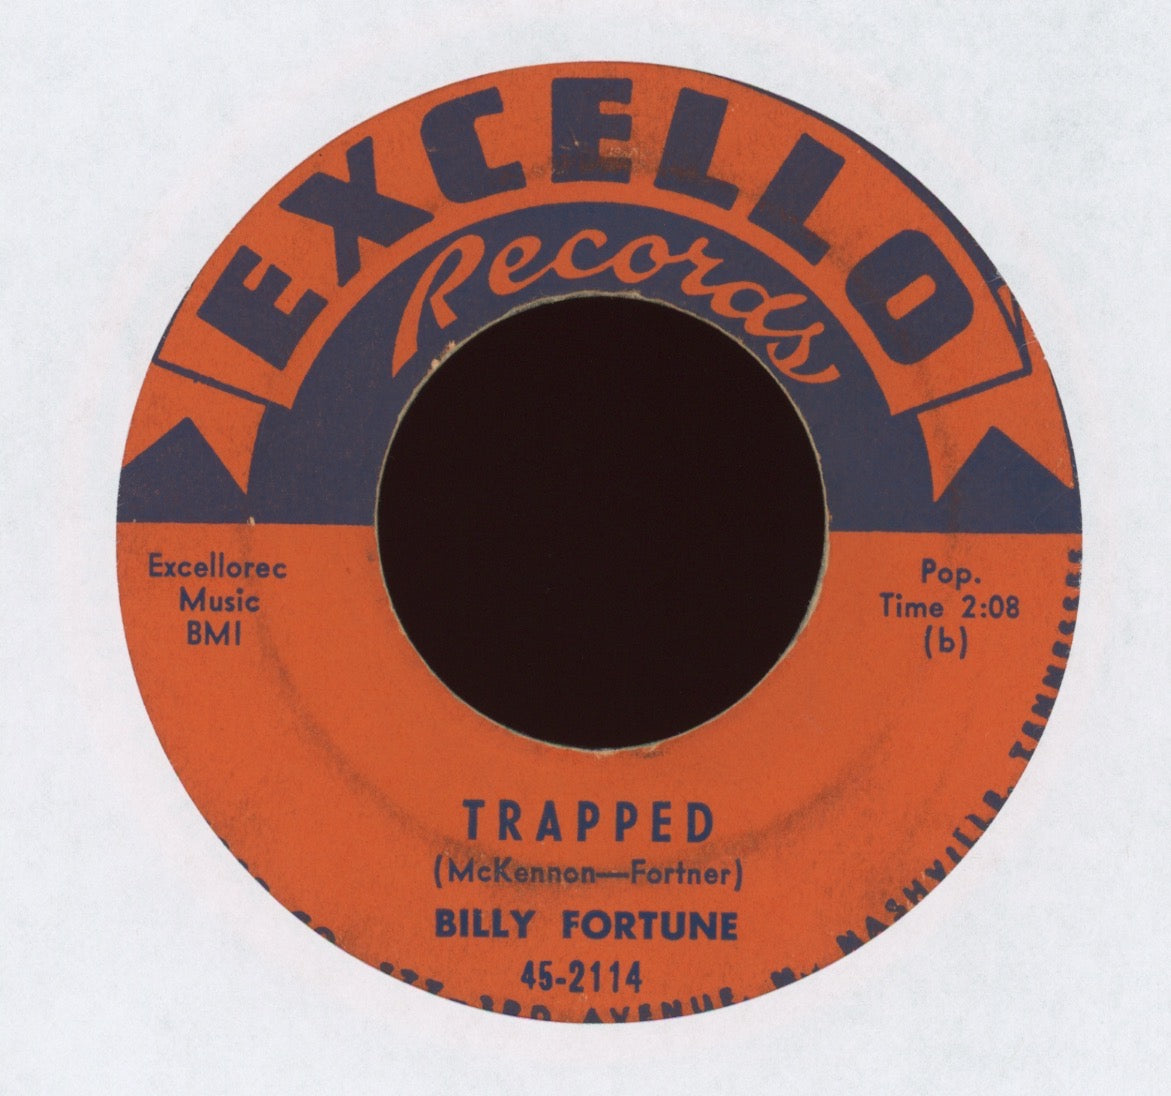 Billy Fortune - Trapped on Excello Rockabilly 45